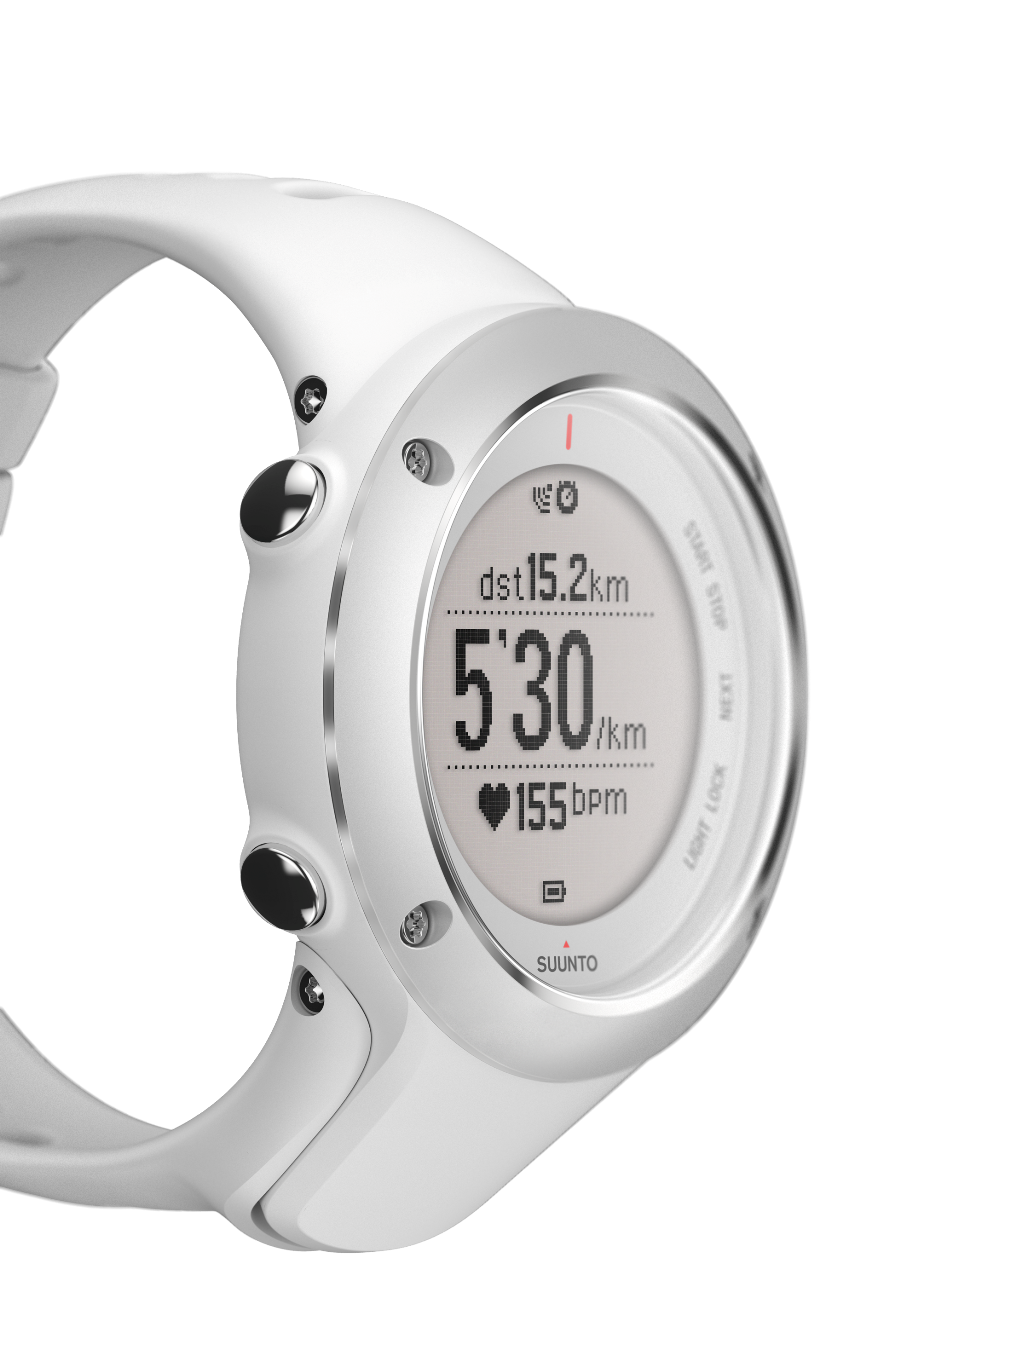 New white Suunto GPS watch for athletes with an improved fit for women